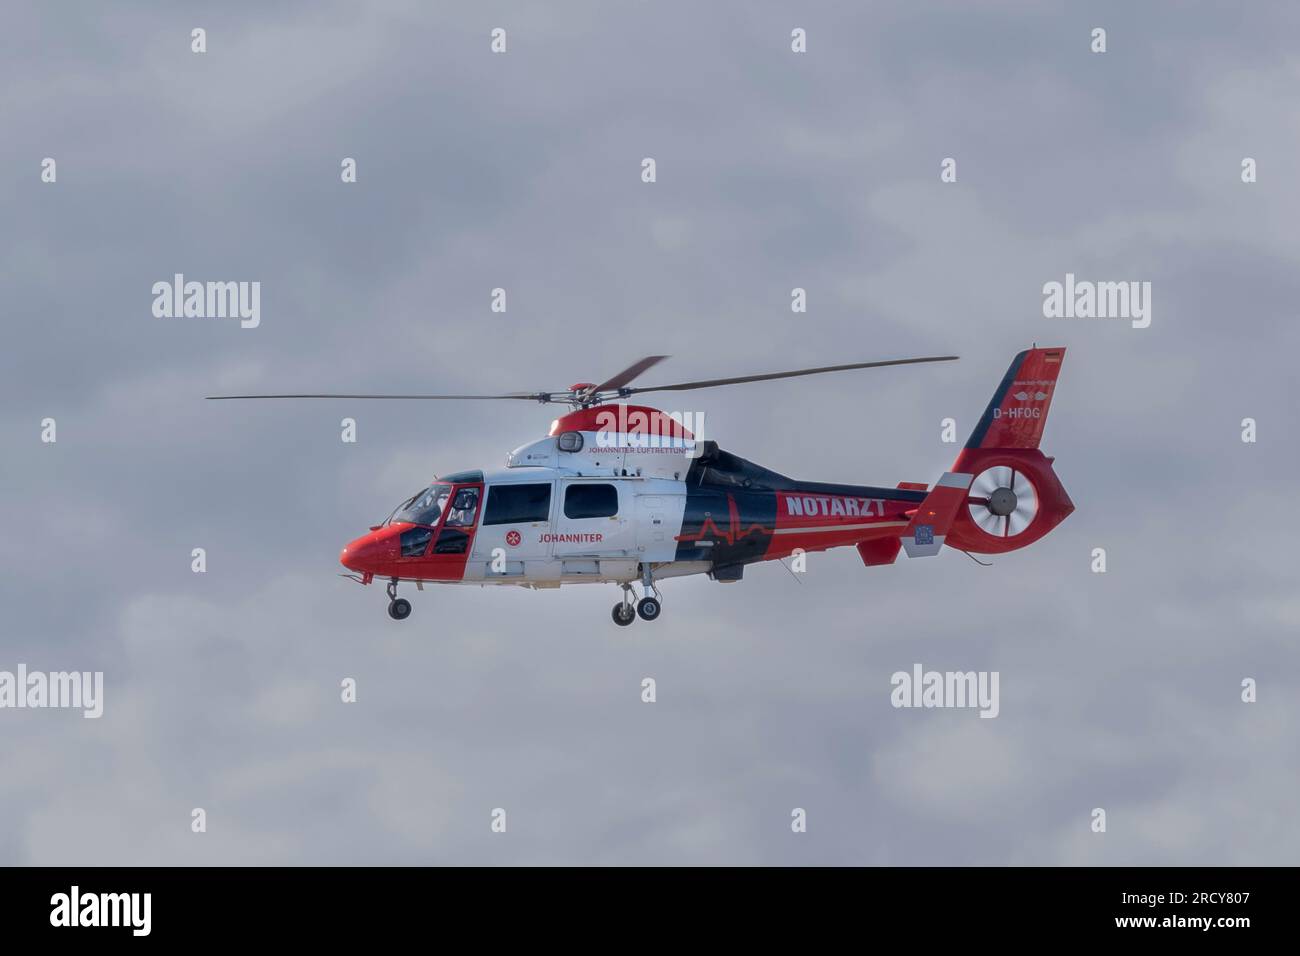 Intensive Care Transport Helicopter D-HFOG at the Nuerburgring Stock Photo